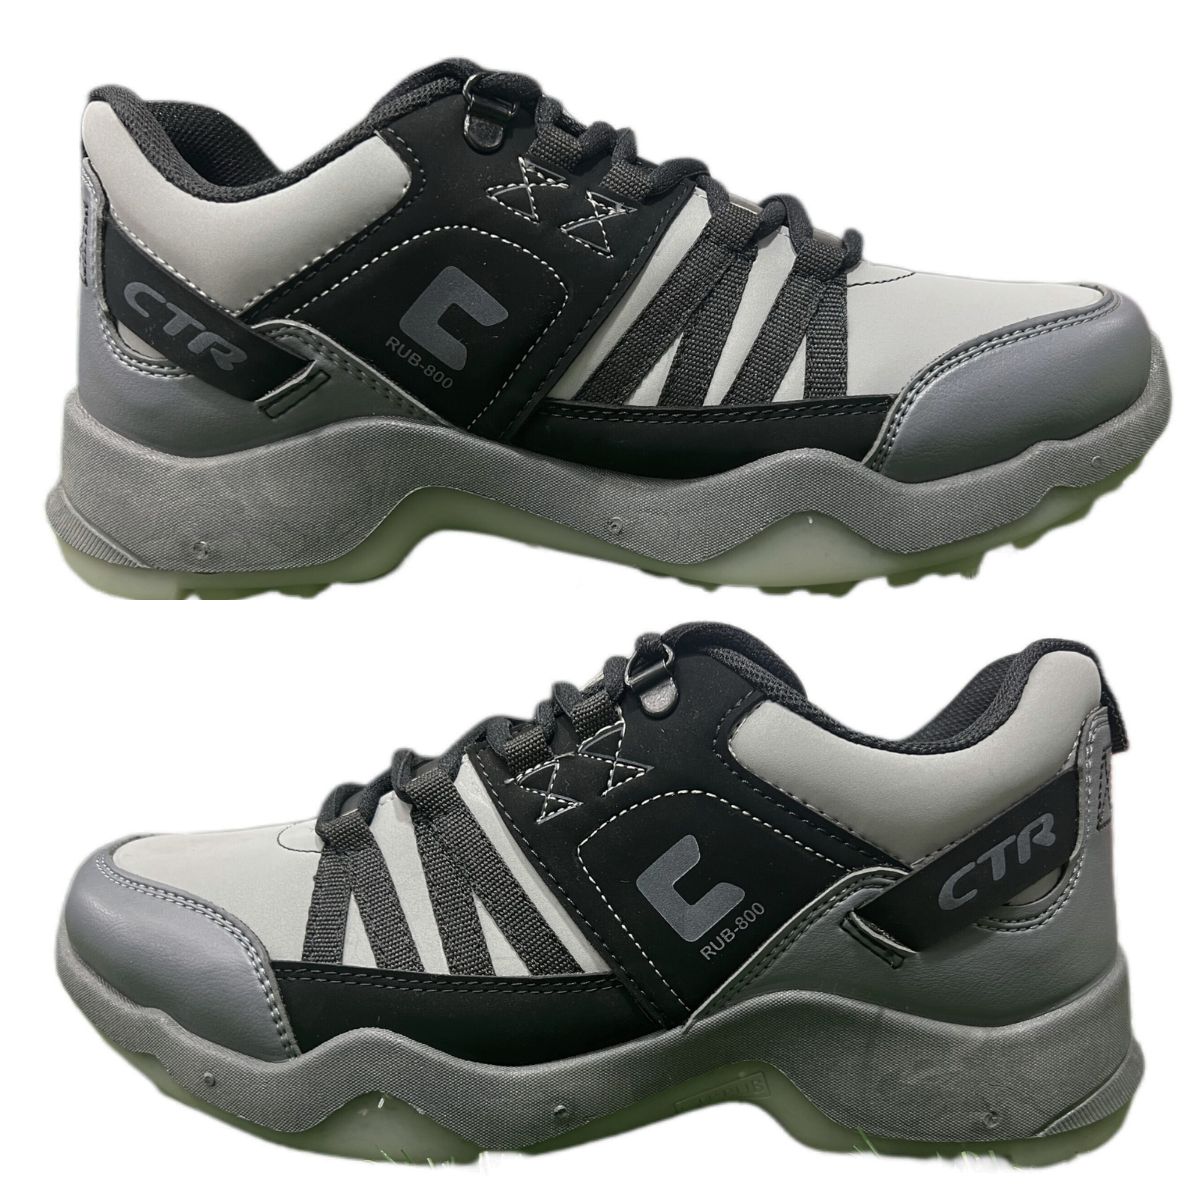 CTR Low Ankle Trekking and Hiking Shoes - Rub-800 - Grey 1